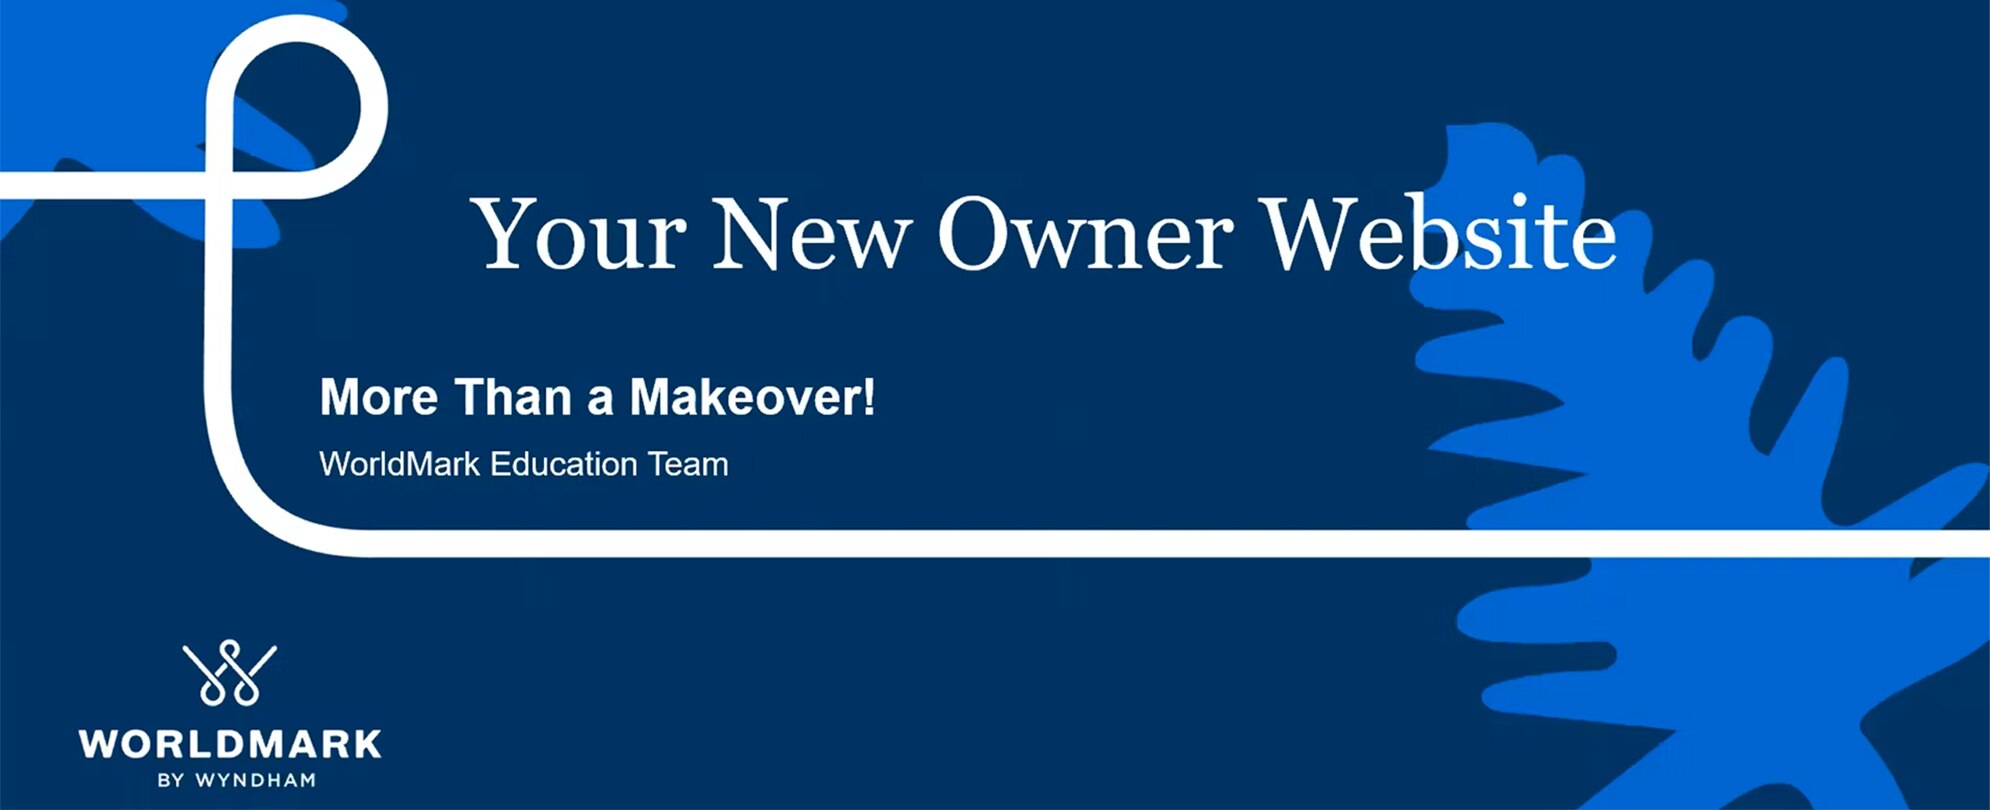 A WorldMark by Wyndham banner with the headline "Your New Owner Website."